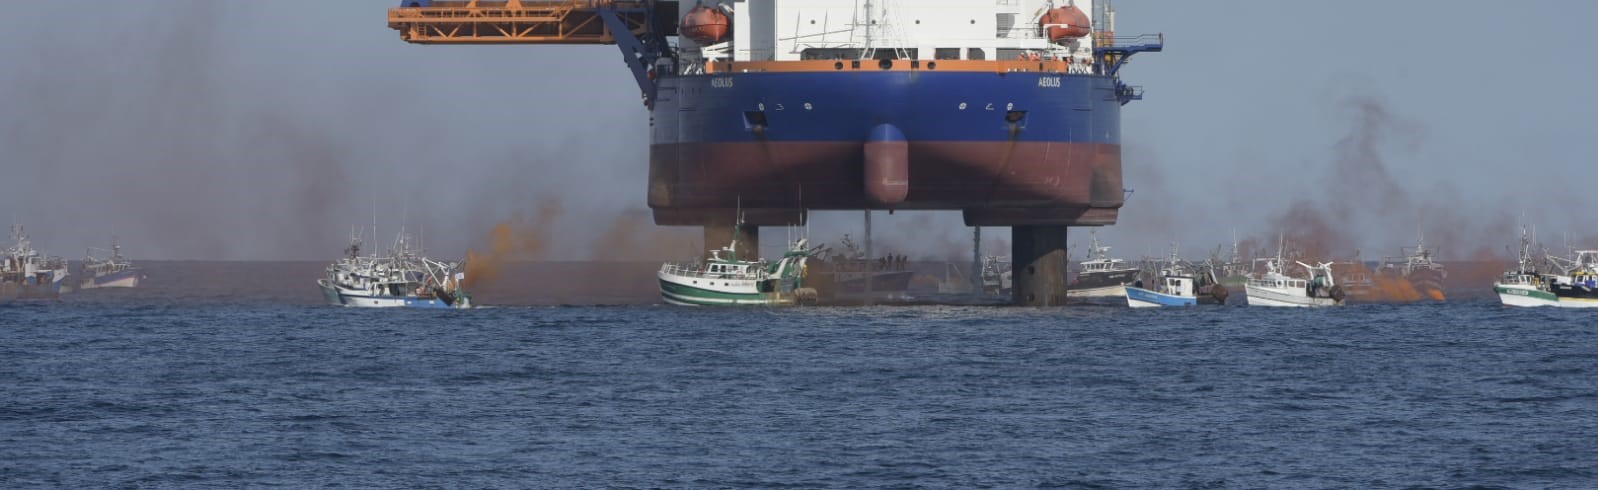 Distress flares fired from the fishing vessels surrounding Aeolus